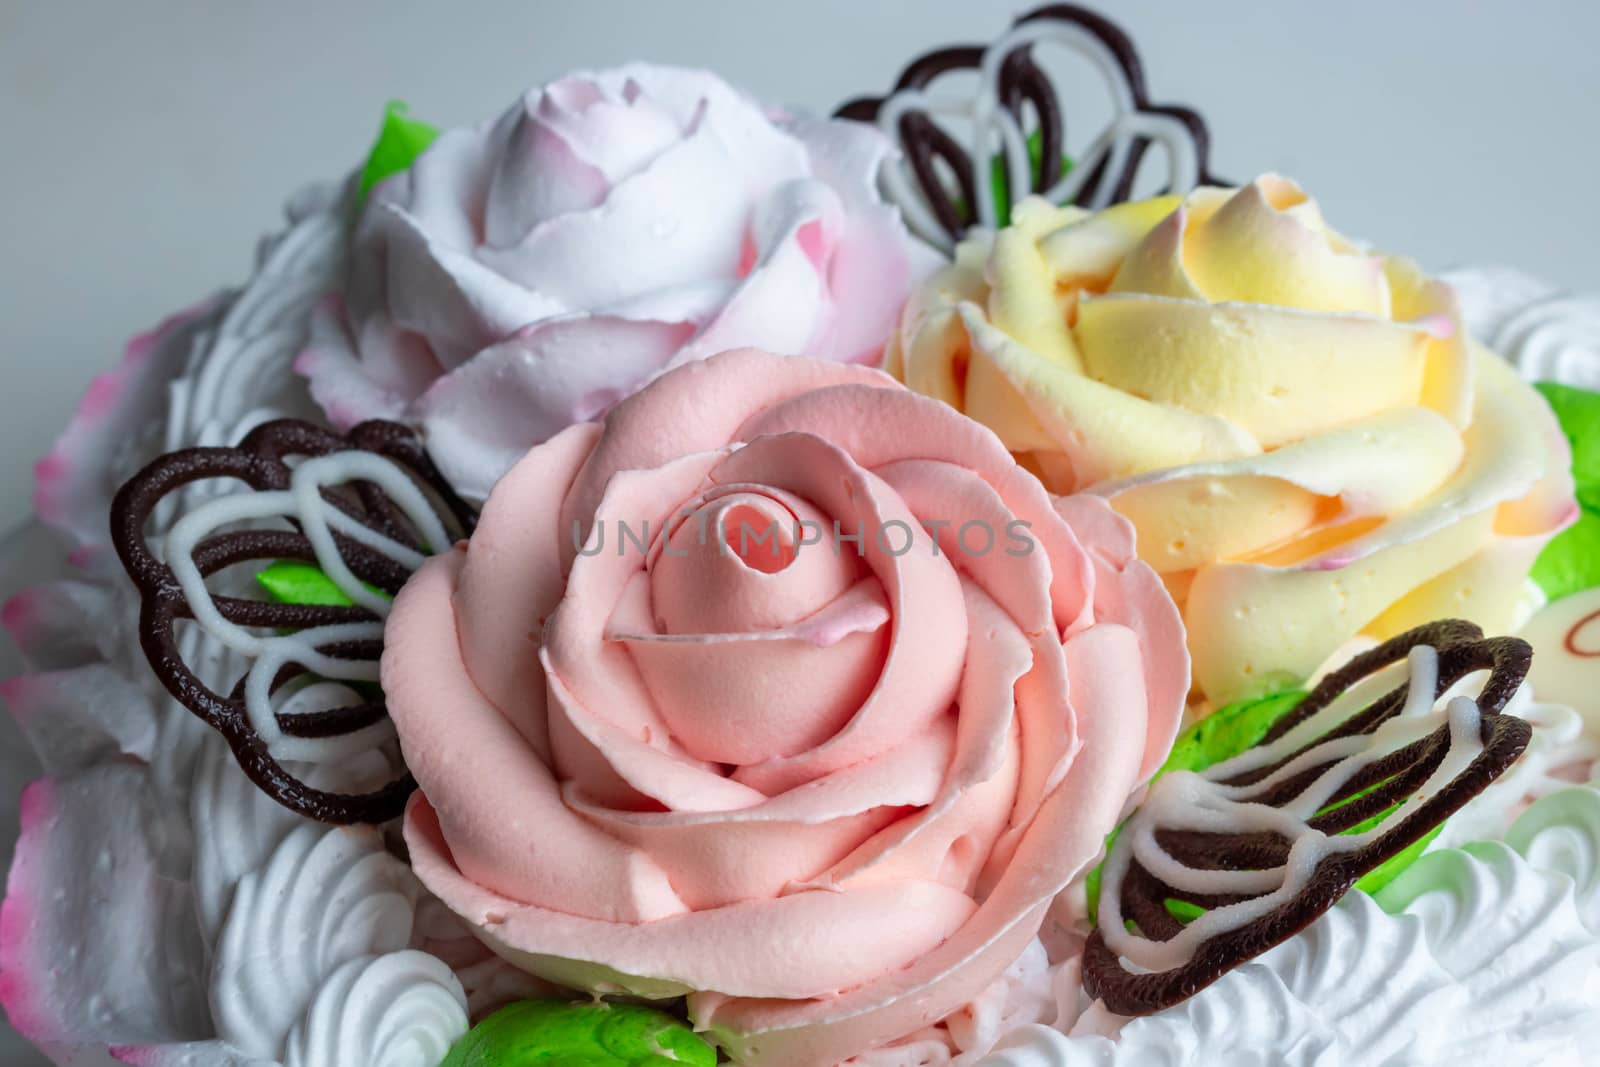 Sweet cream on the cake in the form of colorful roses by lapushka62